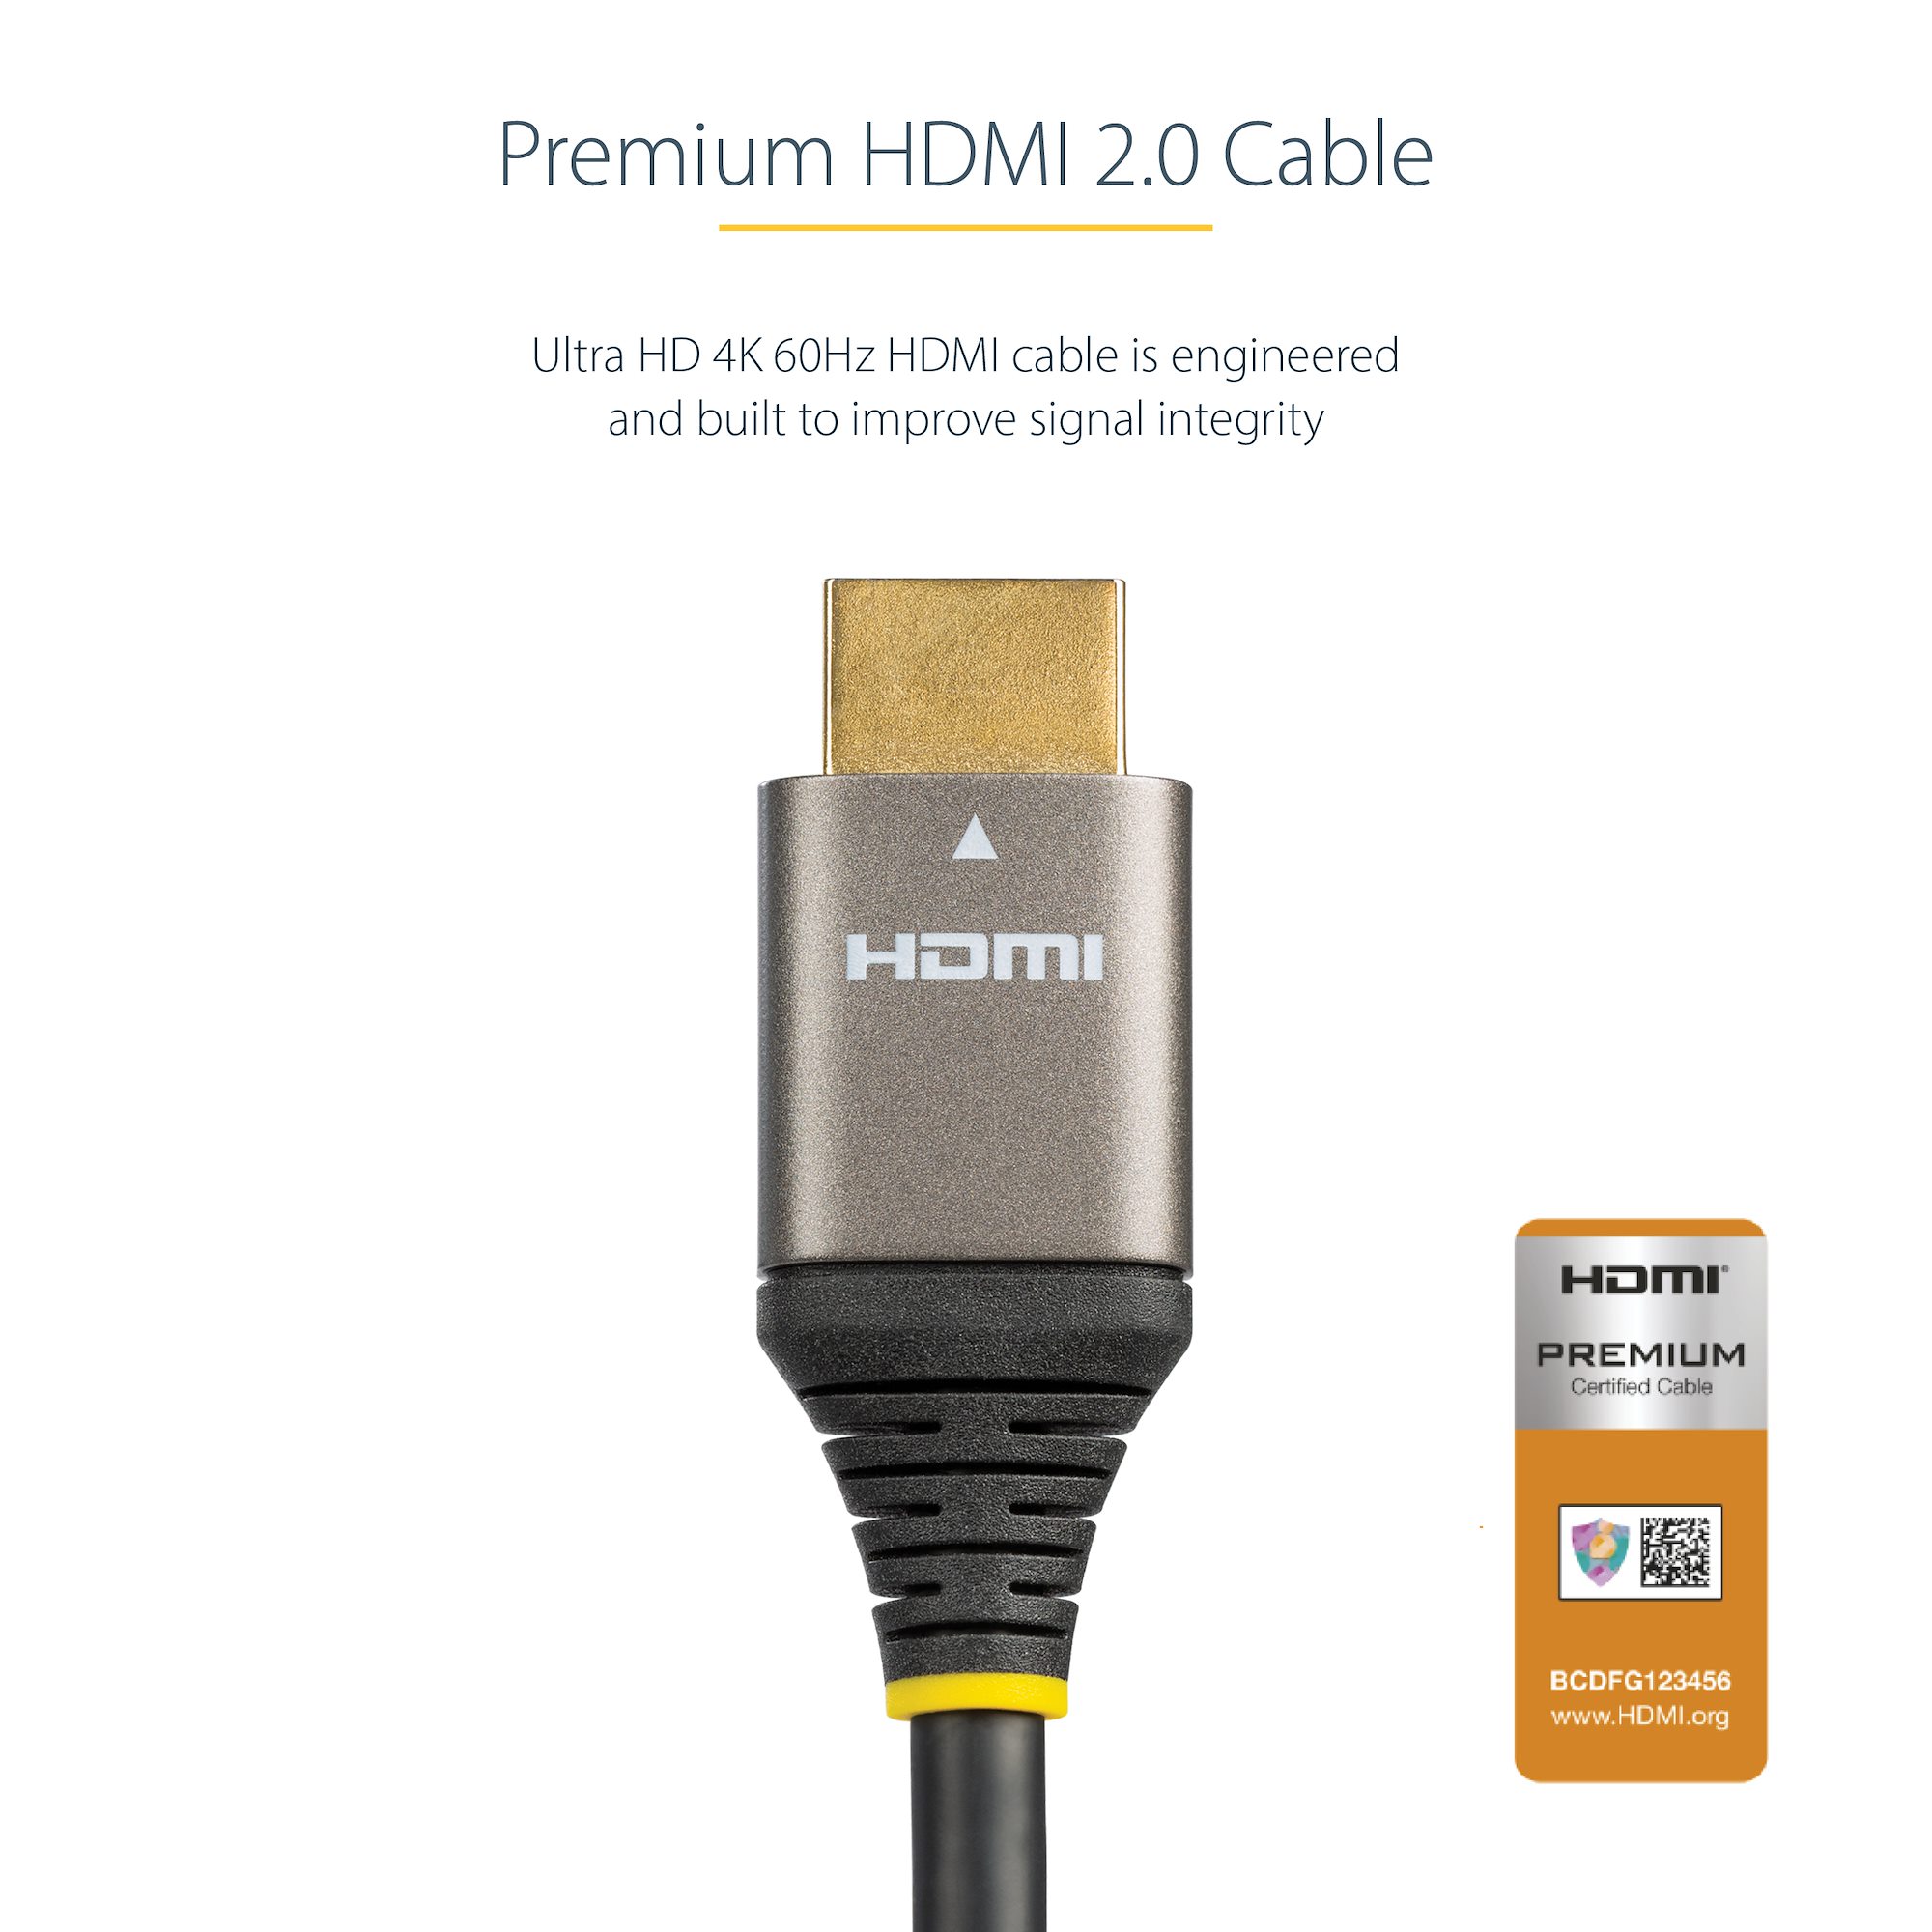 Startech .com 13ft (4m) Premium Certified HDMI 2.0 Cable, High Speed Ultra  HD 4K 60Hz HDMI Cable w/ Ethernet, HDR10, UHD HDMI Monitor Cord13 f